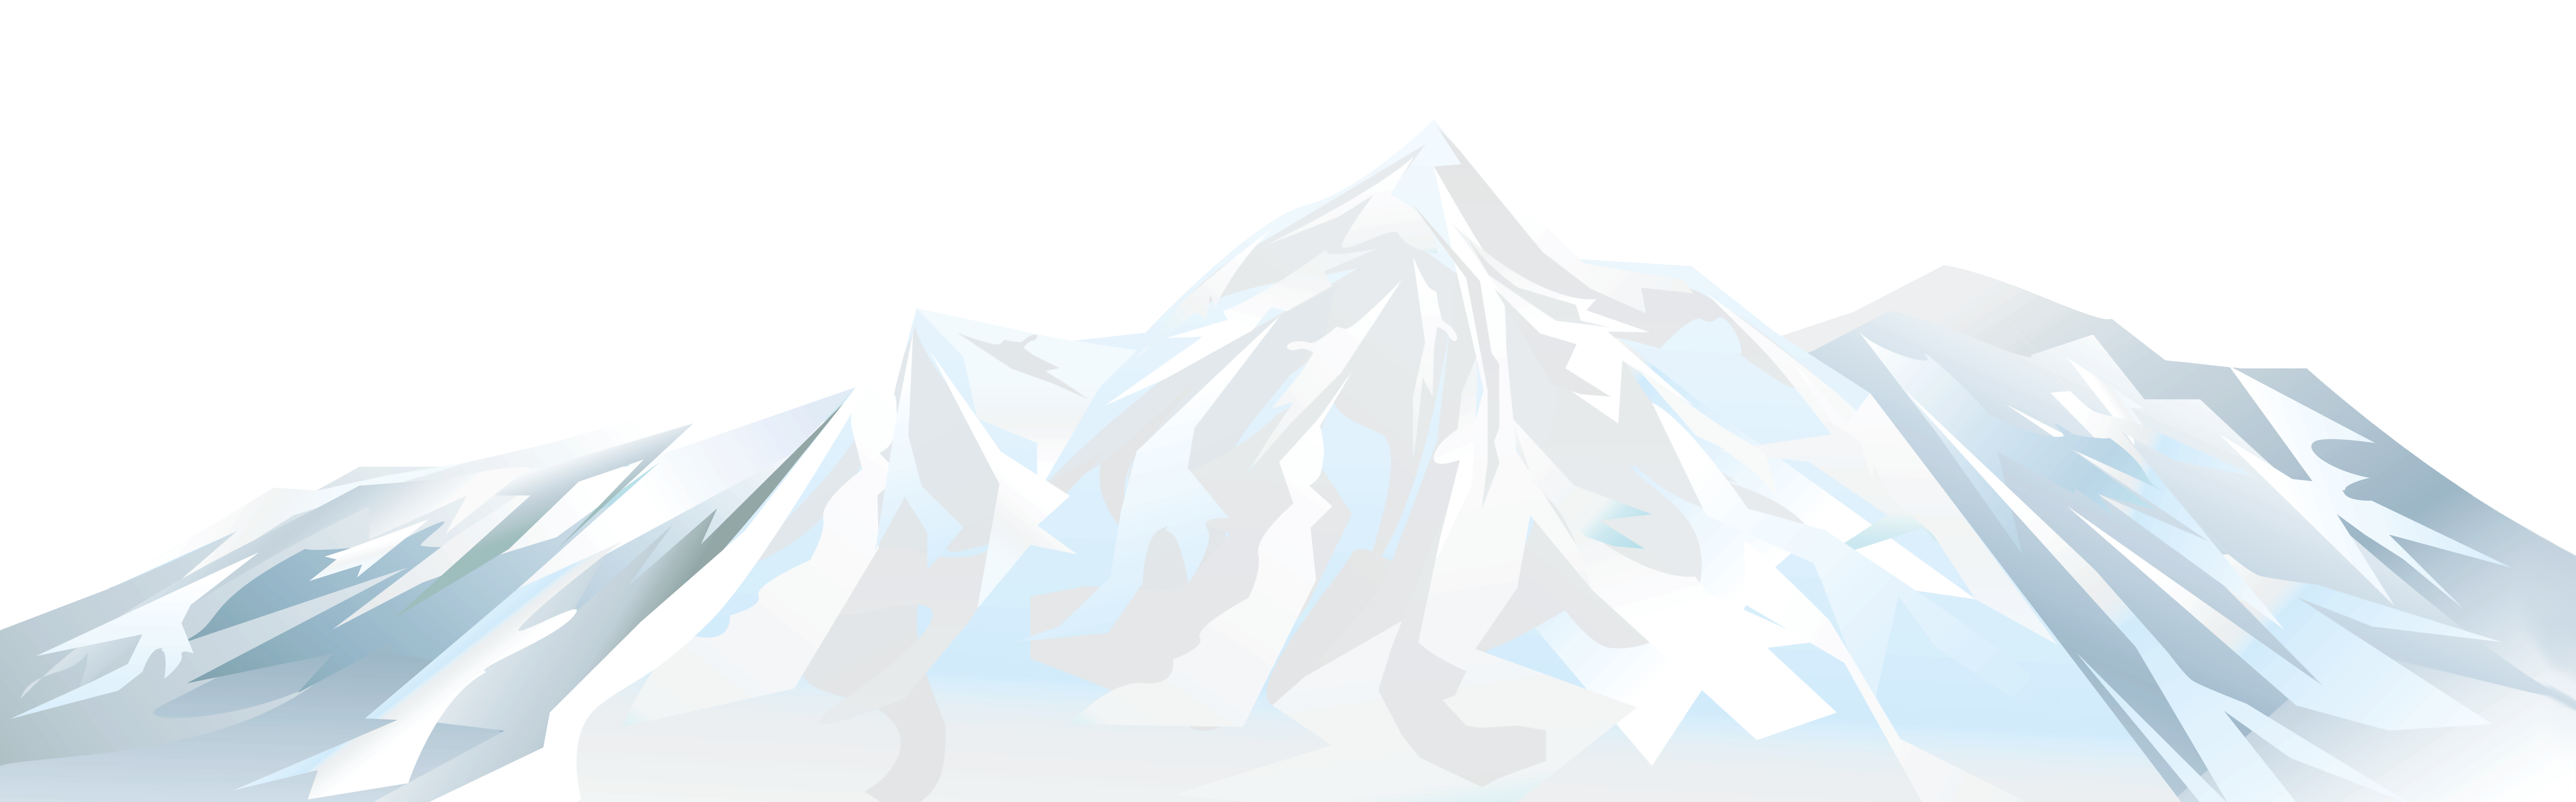  collection of winter. Trail clipart summit mountain